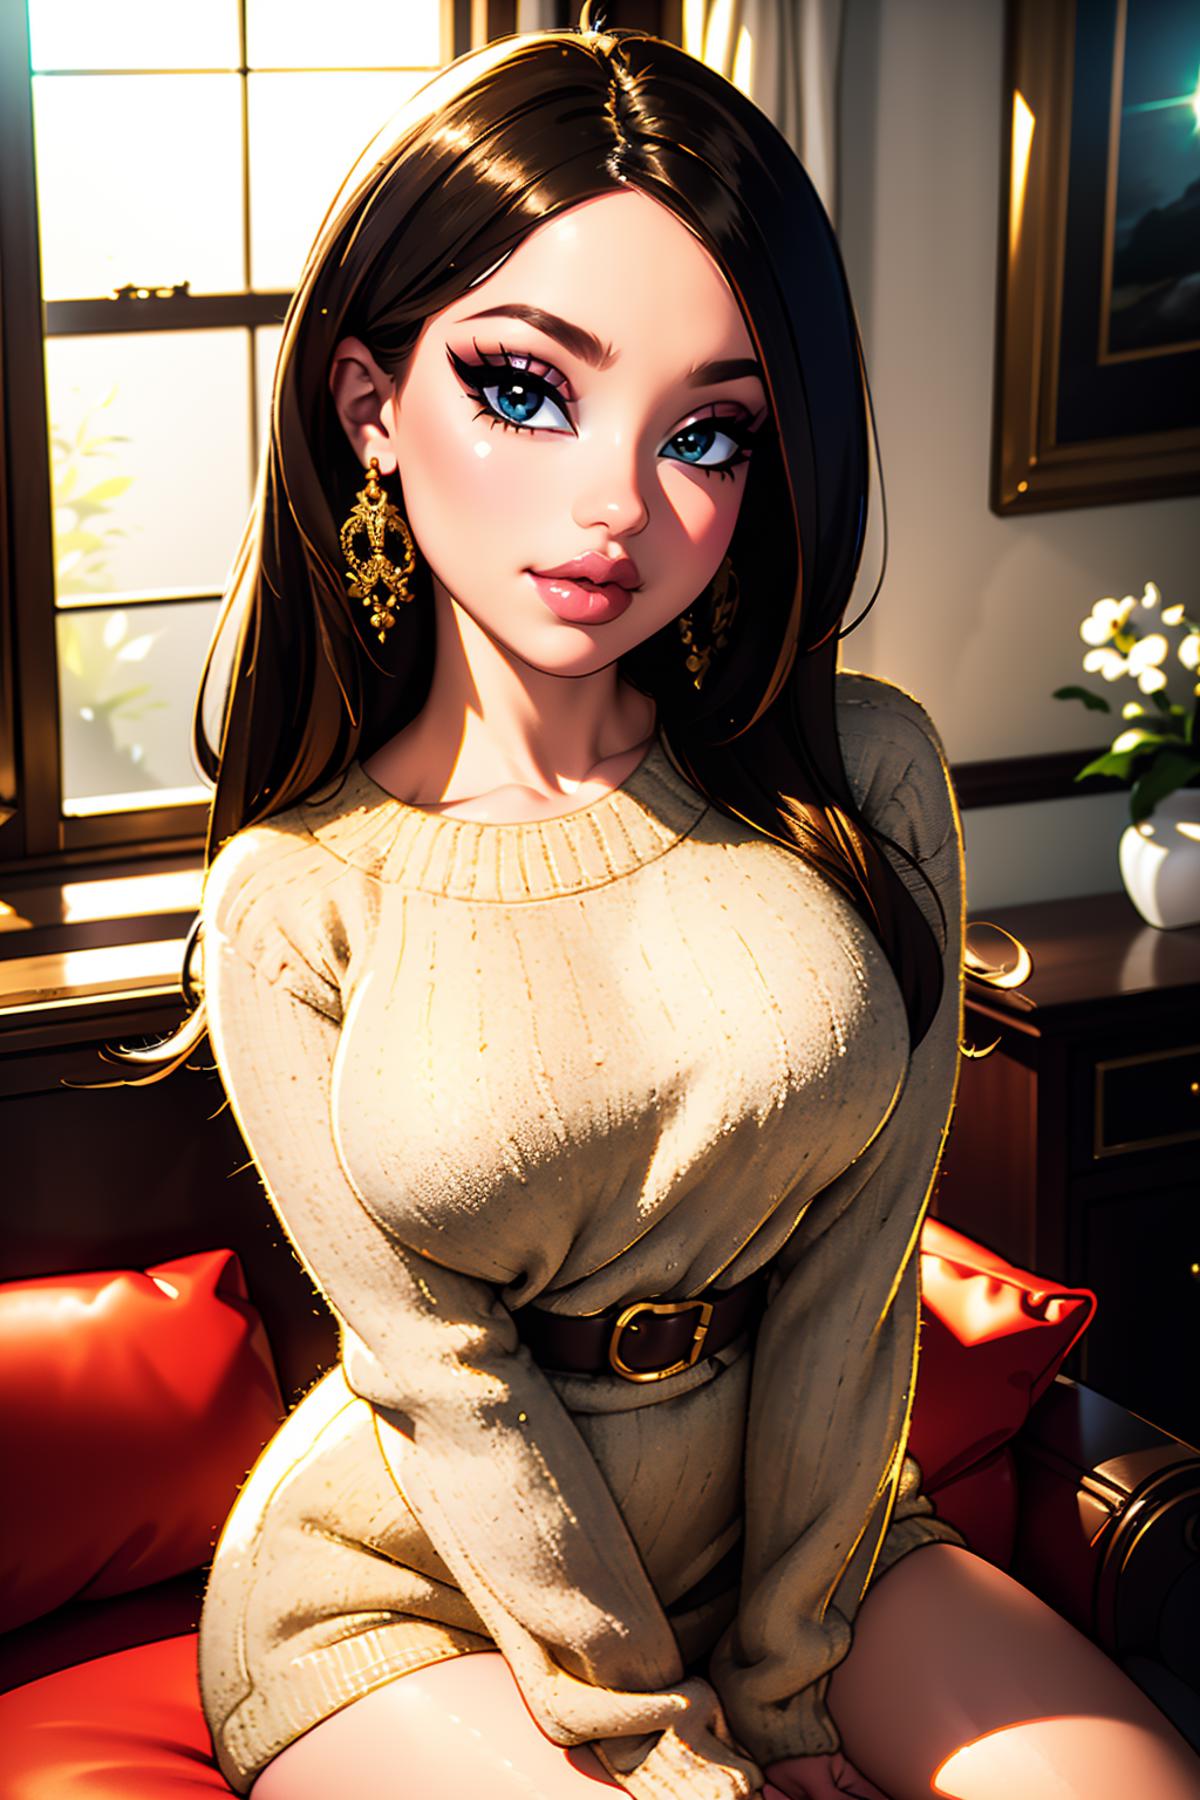 AI model image by RubberDuckie